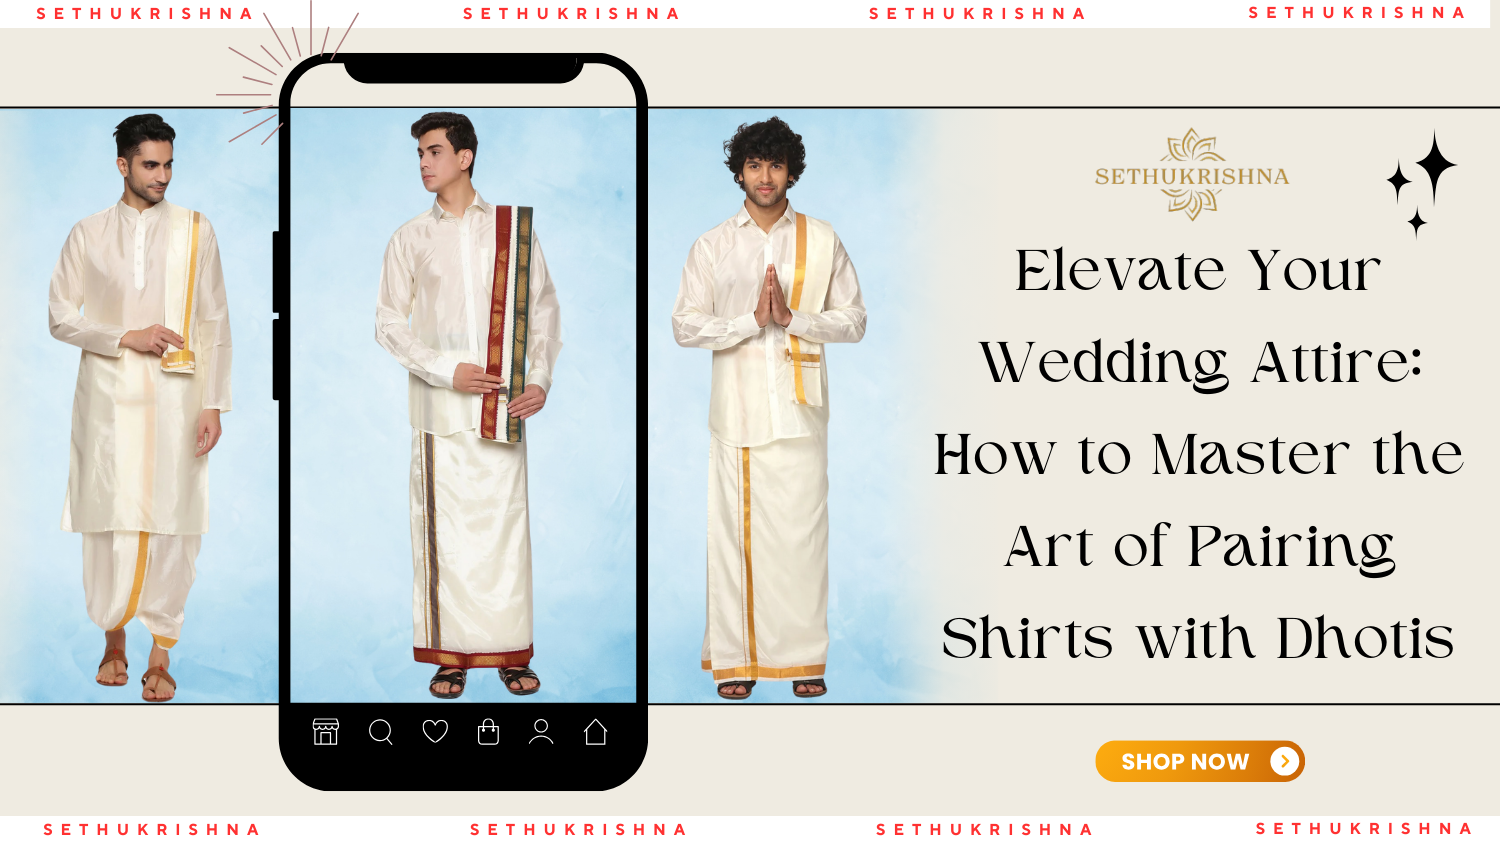 Elevate Your Wedding Attire: How to Master the Art of Pairing Shirts with Dhotis